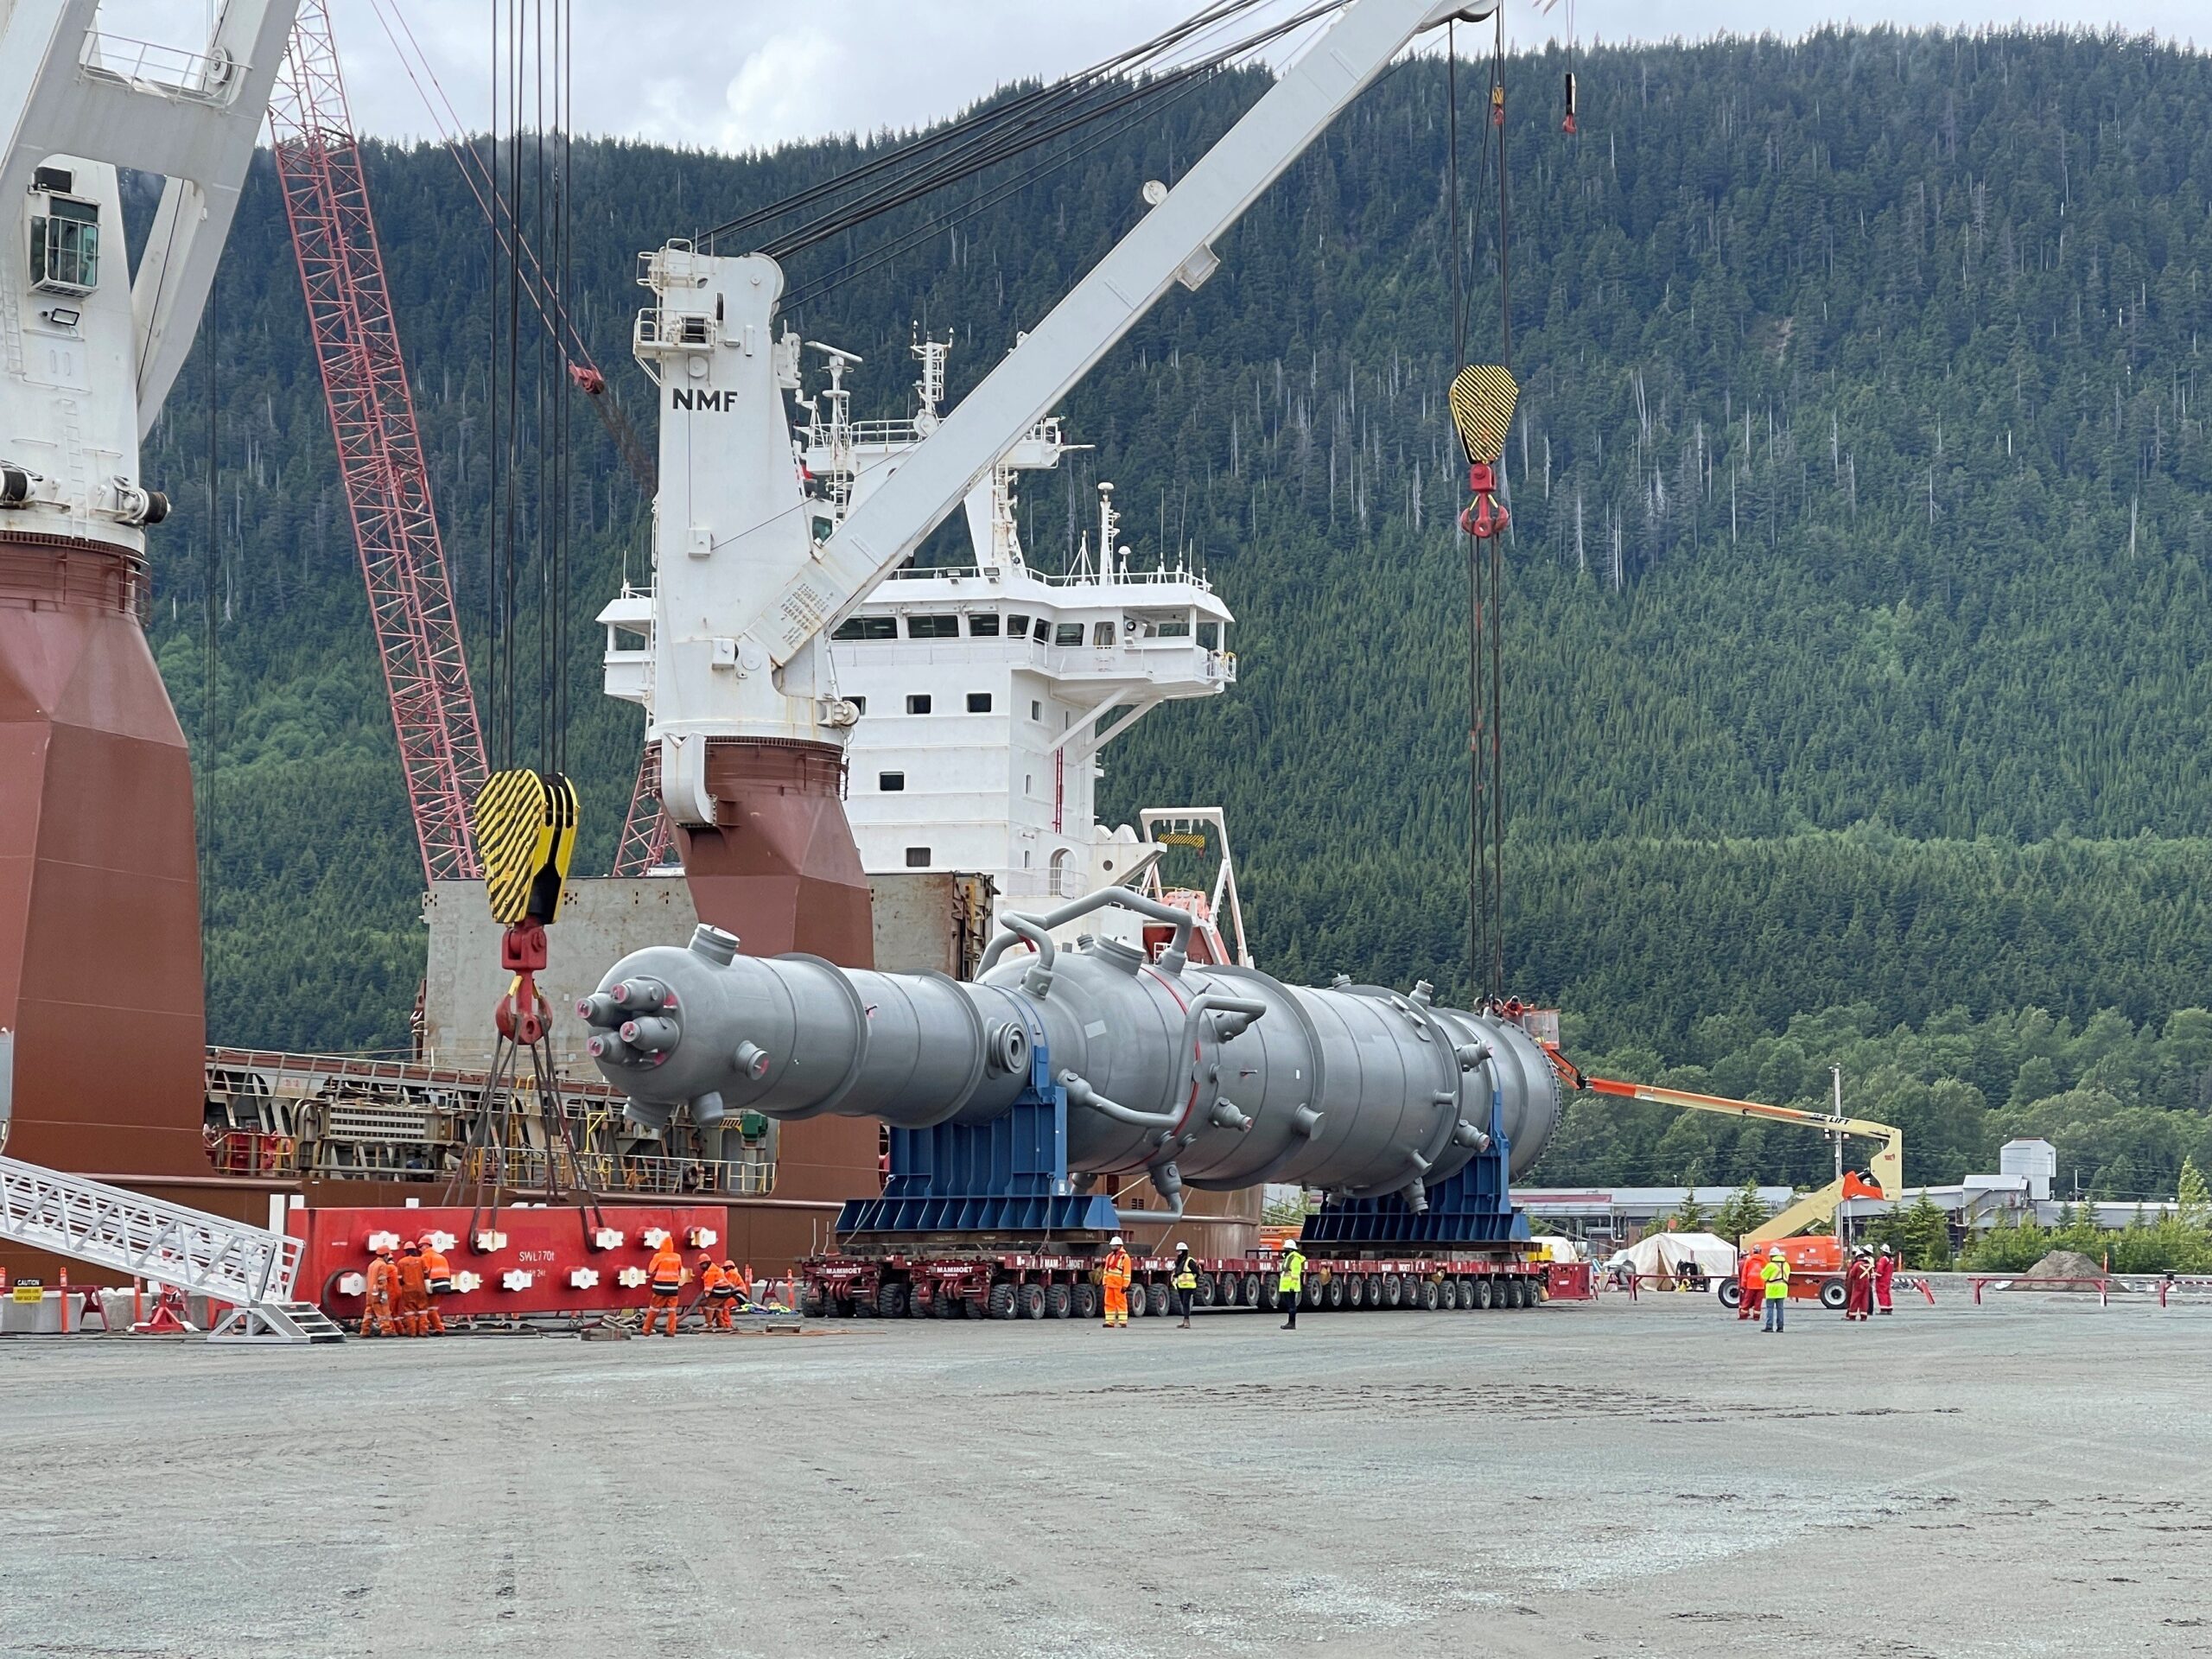 Main cryogenic heat exchanger and precoolers arrive at the LNG Canada site in Kitimat